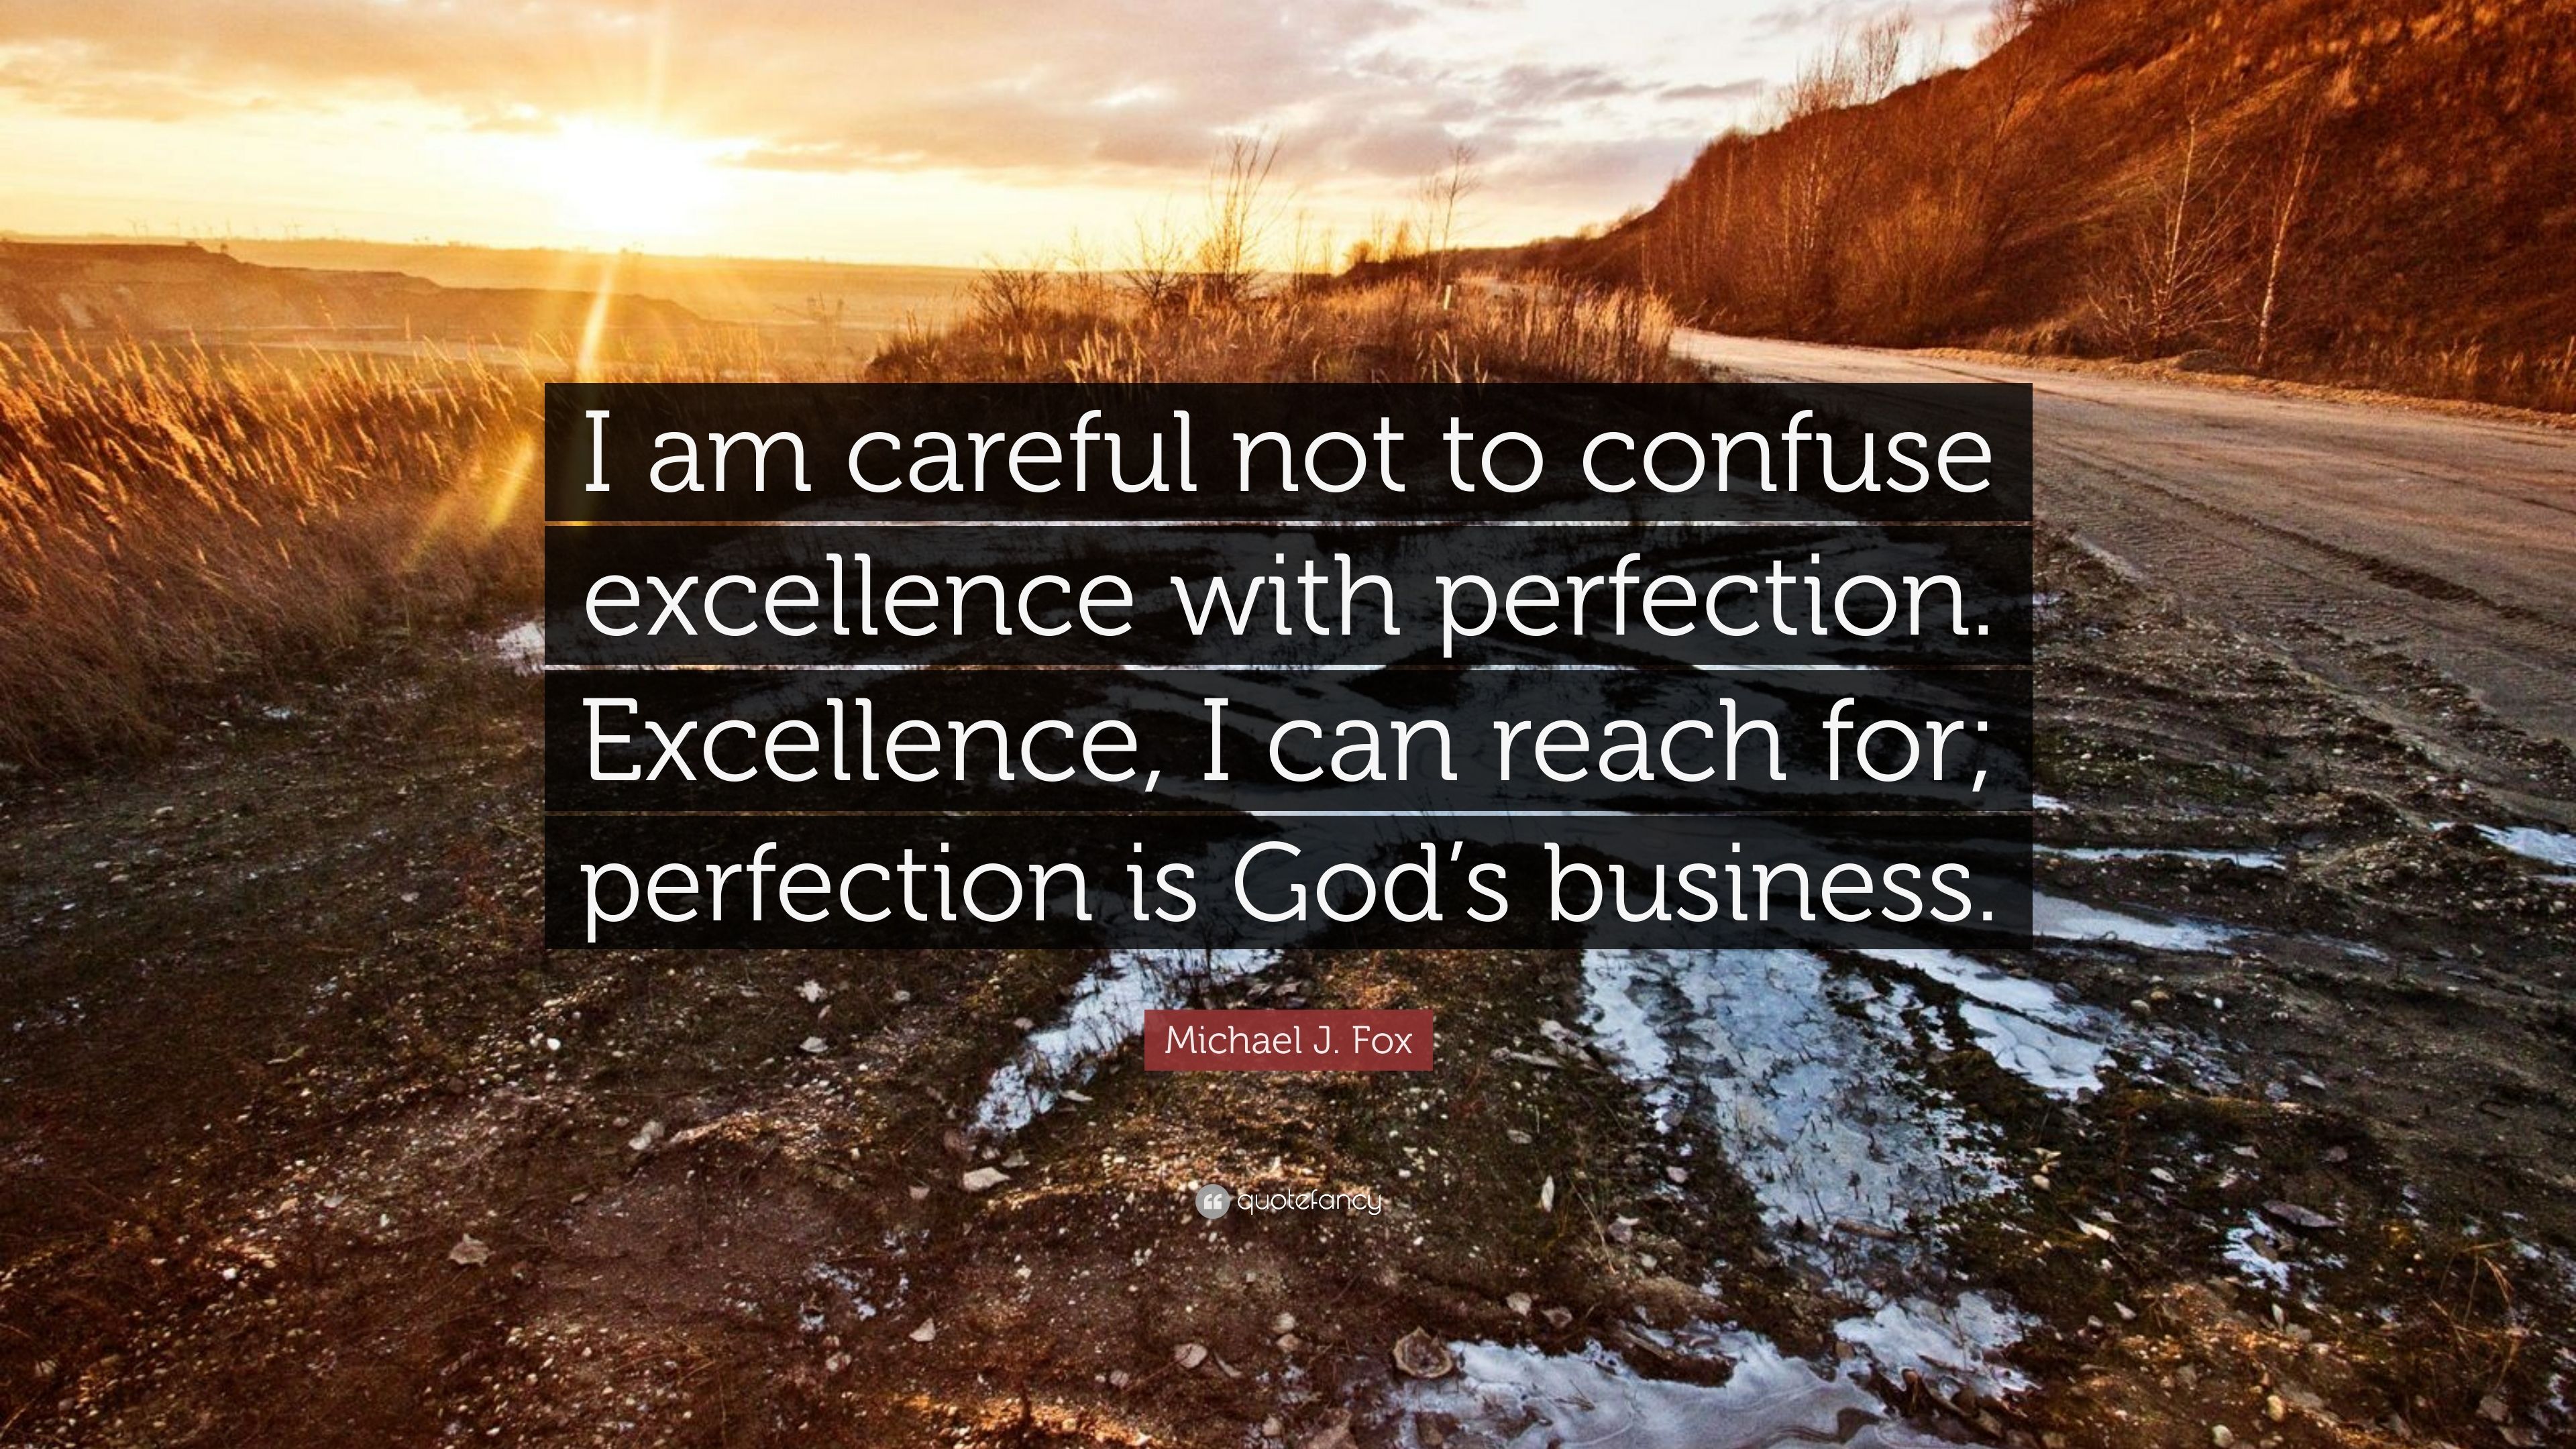 Michael J. Fox Quote: “I am careful not to confuse excellence